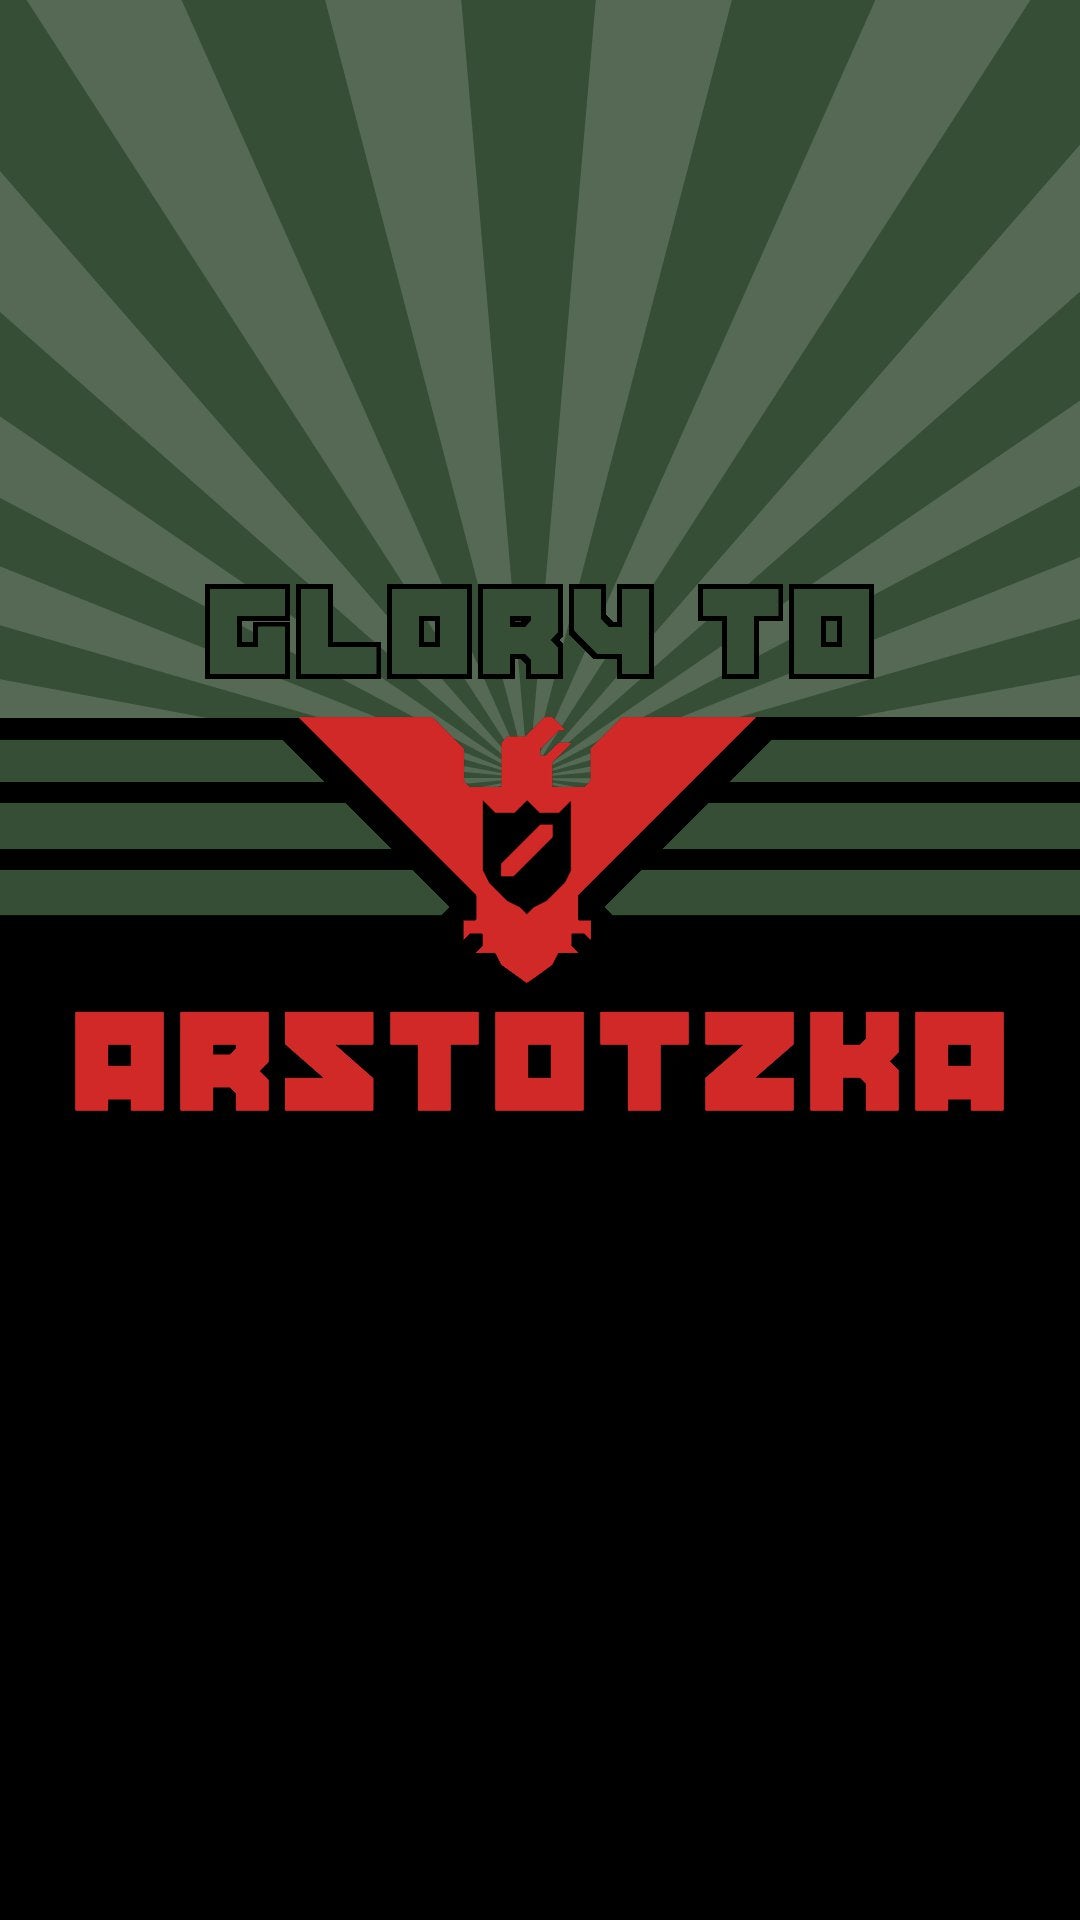 Papers Please Wallpapers